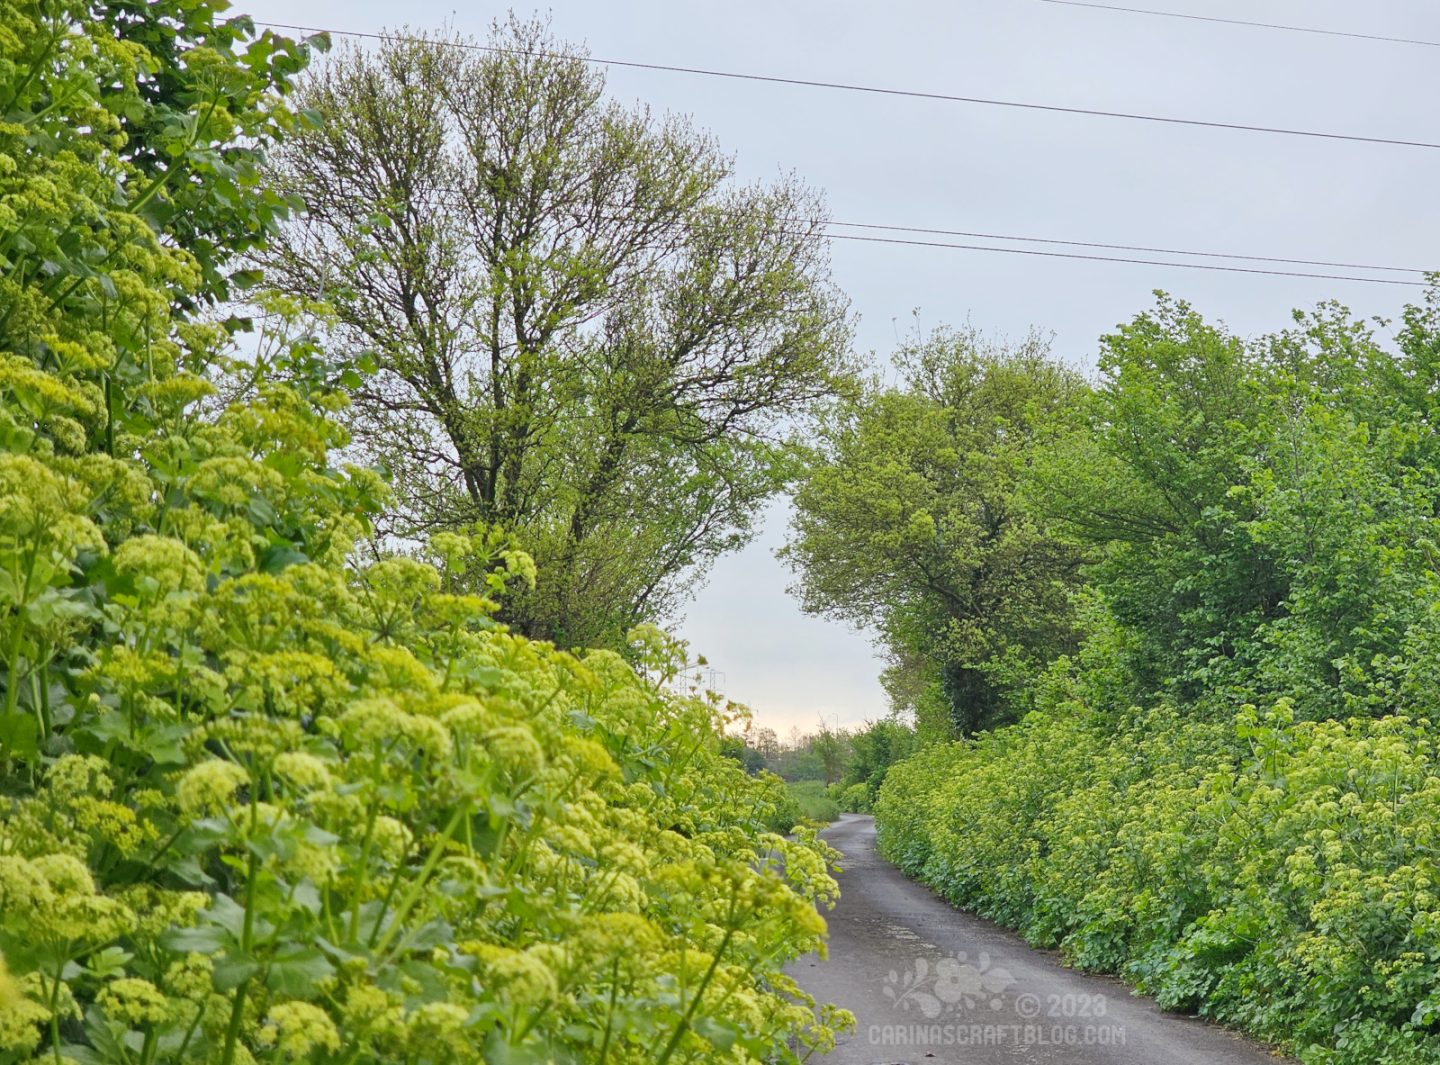 View of a country lane with hedges and trees on both sides, leading towards a slight bend where two trees are almost touching each other across the lane.